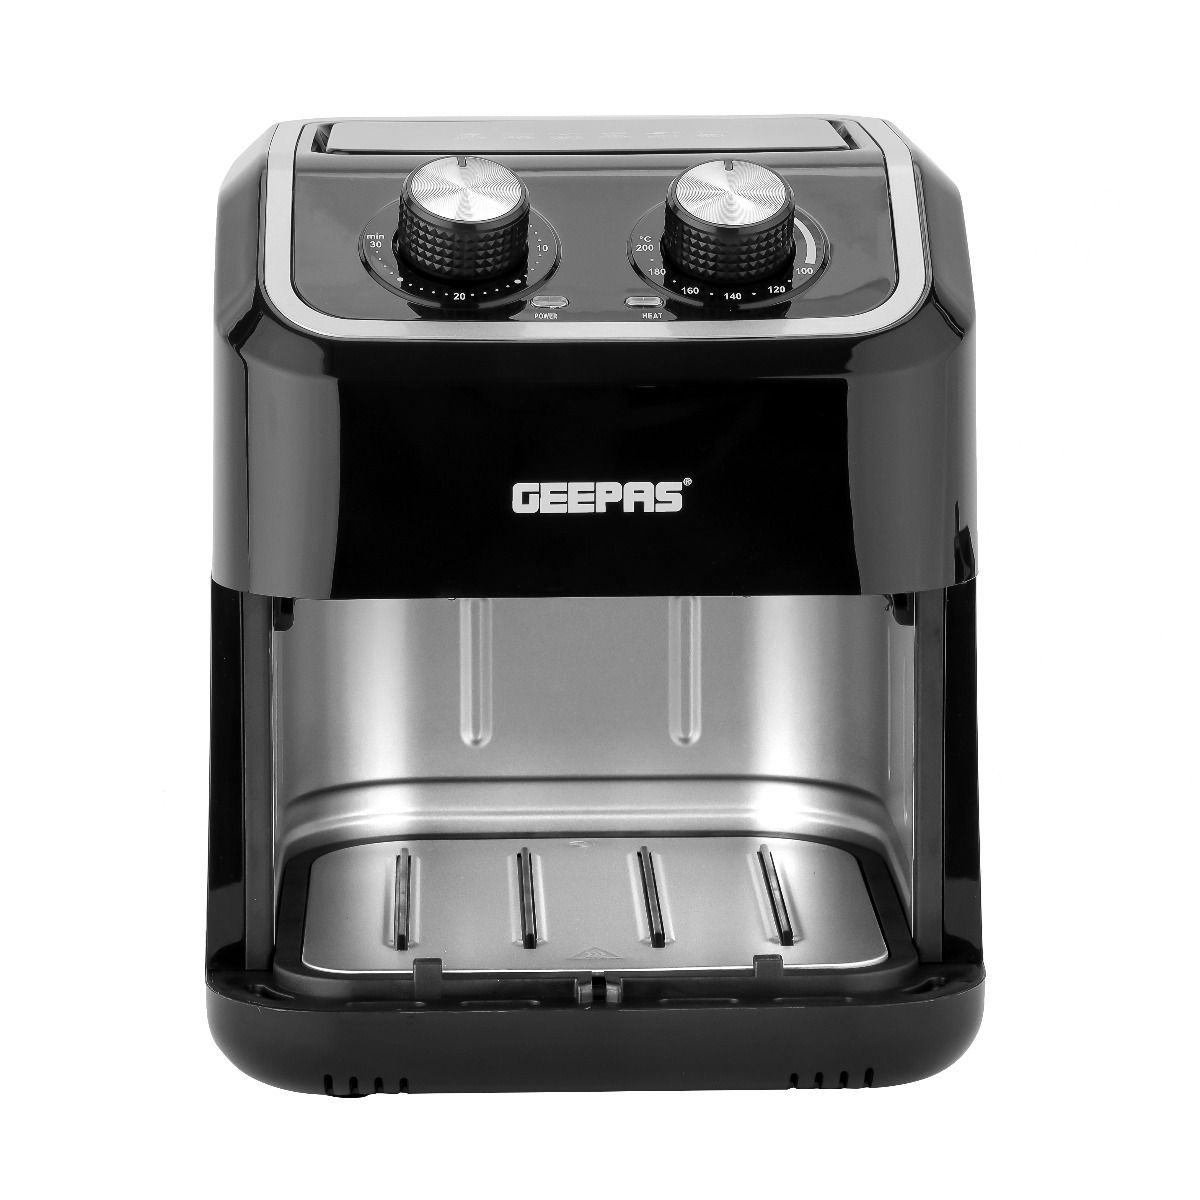 Geepas Air Fryer GAF37528 1600W, 5L Capacity With A Rack | Adjustable Timer And Temperature